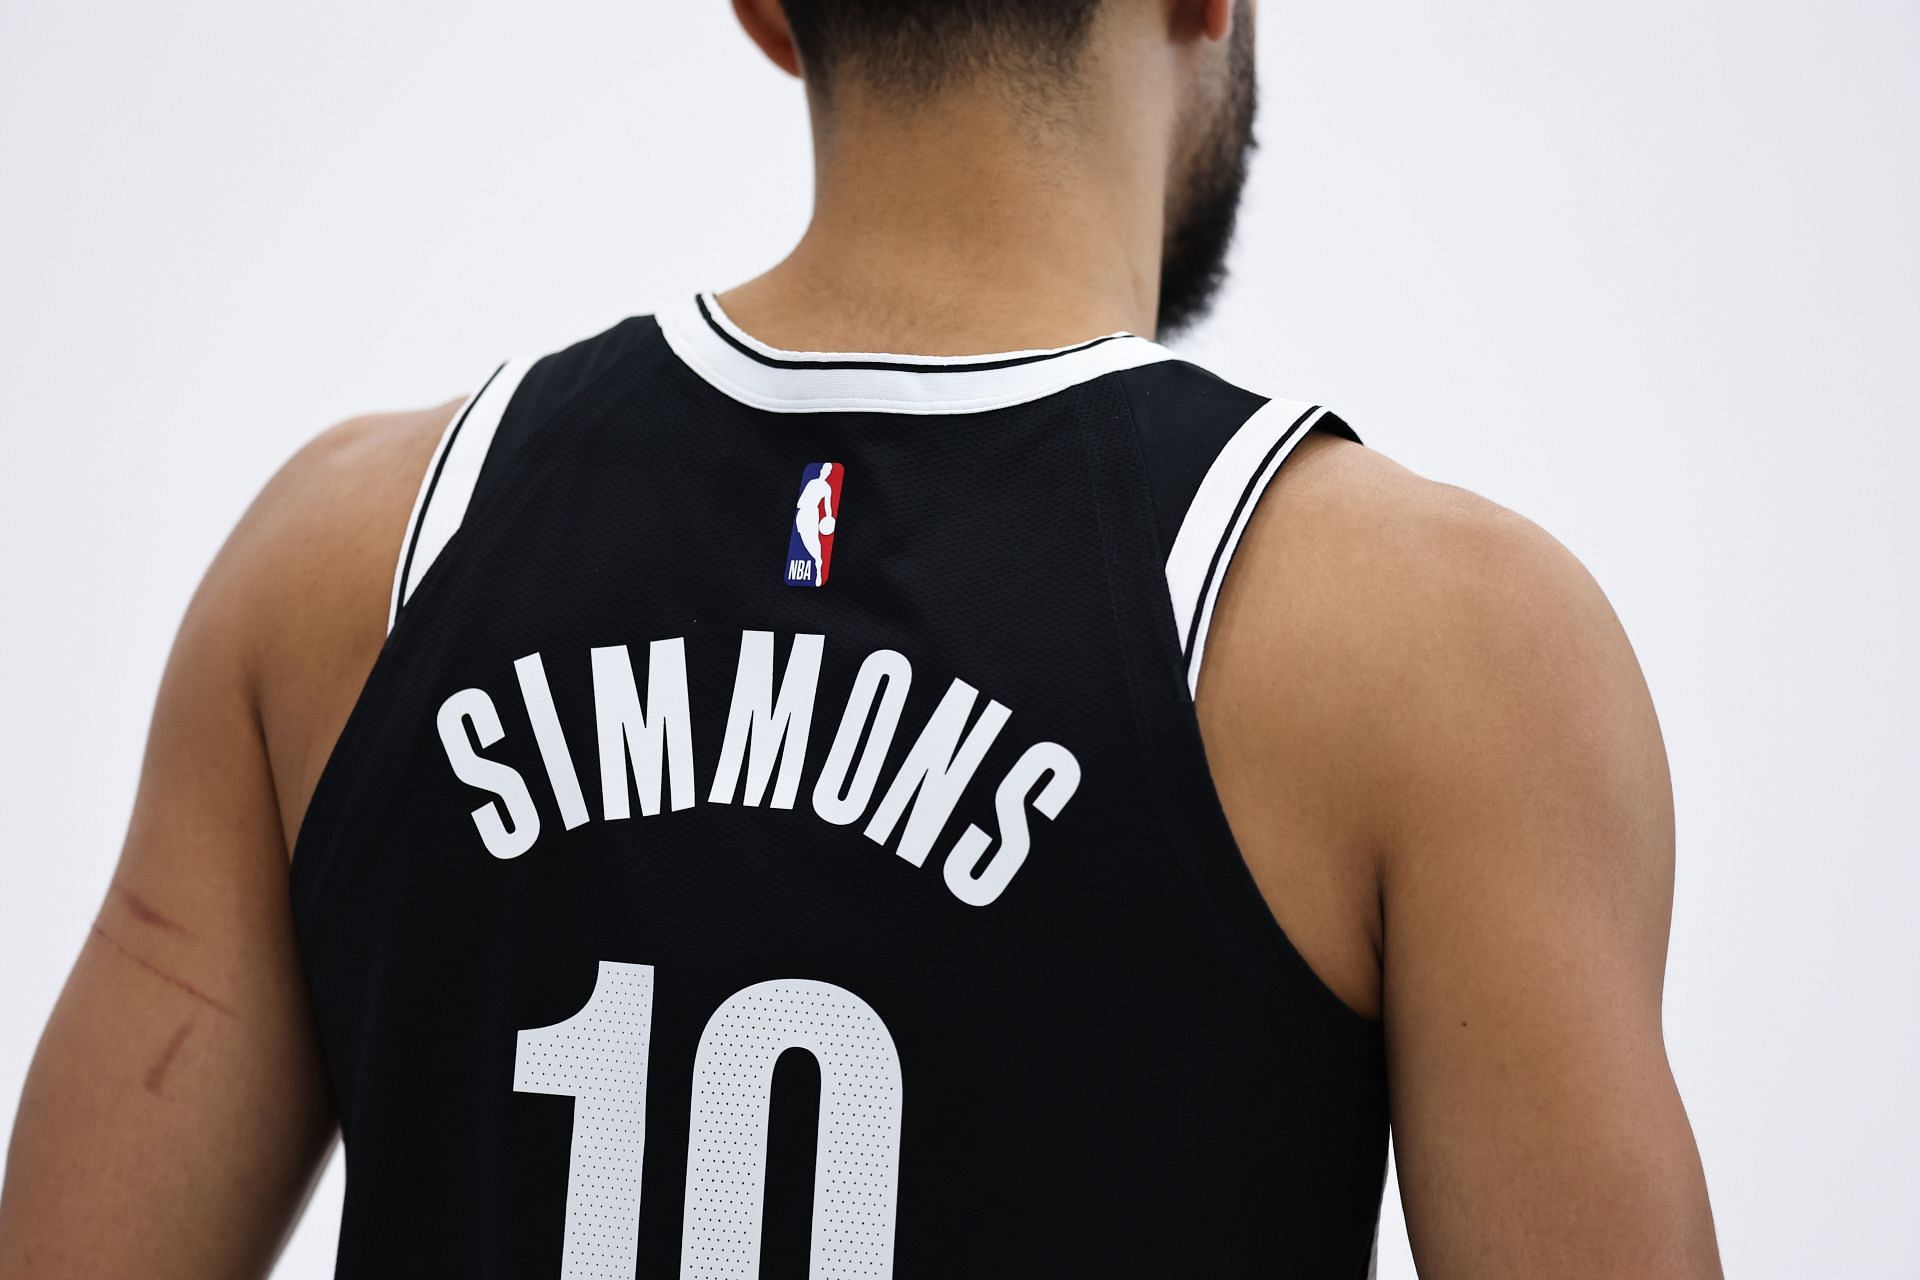 Ben Simmons at the Brooklyn Nets Media Day